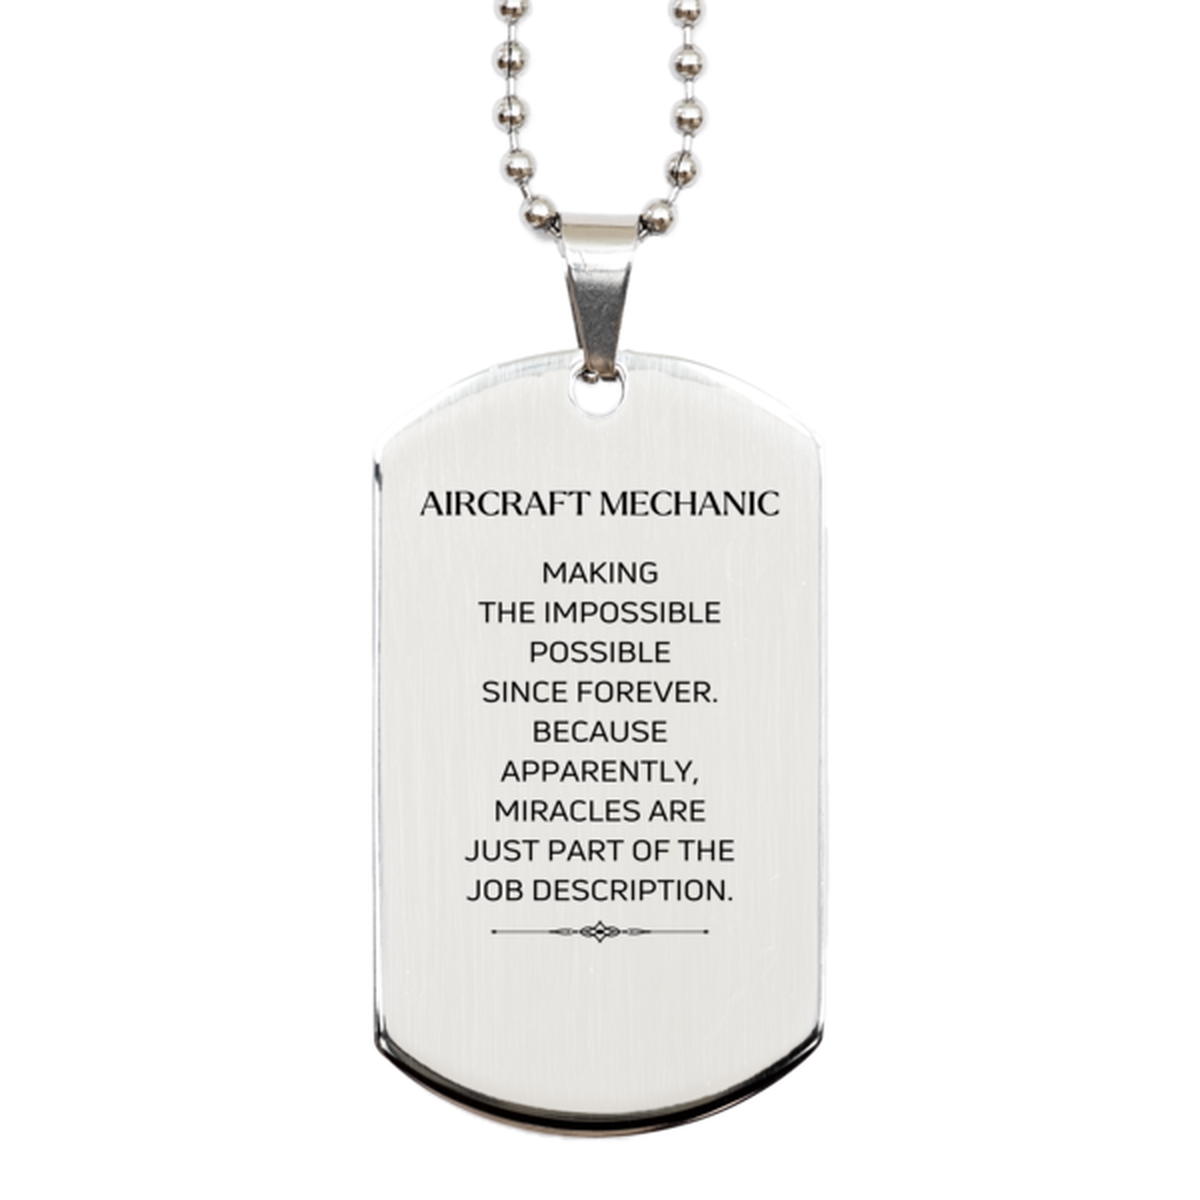 Funny Aircraft Mechanic Gifts, Miracles are just part of the job description, Inspirational Birthday Silver Dog Tag For Aircraft Mechanic, Men, Women, Coworkers, Friends, Boss